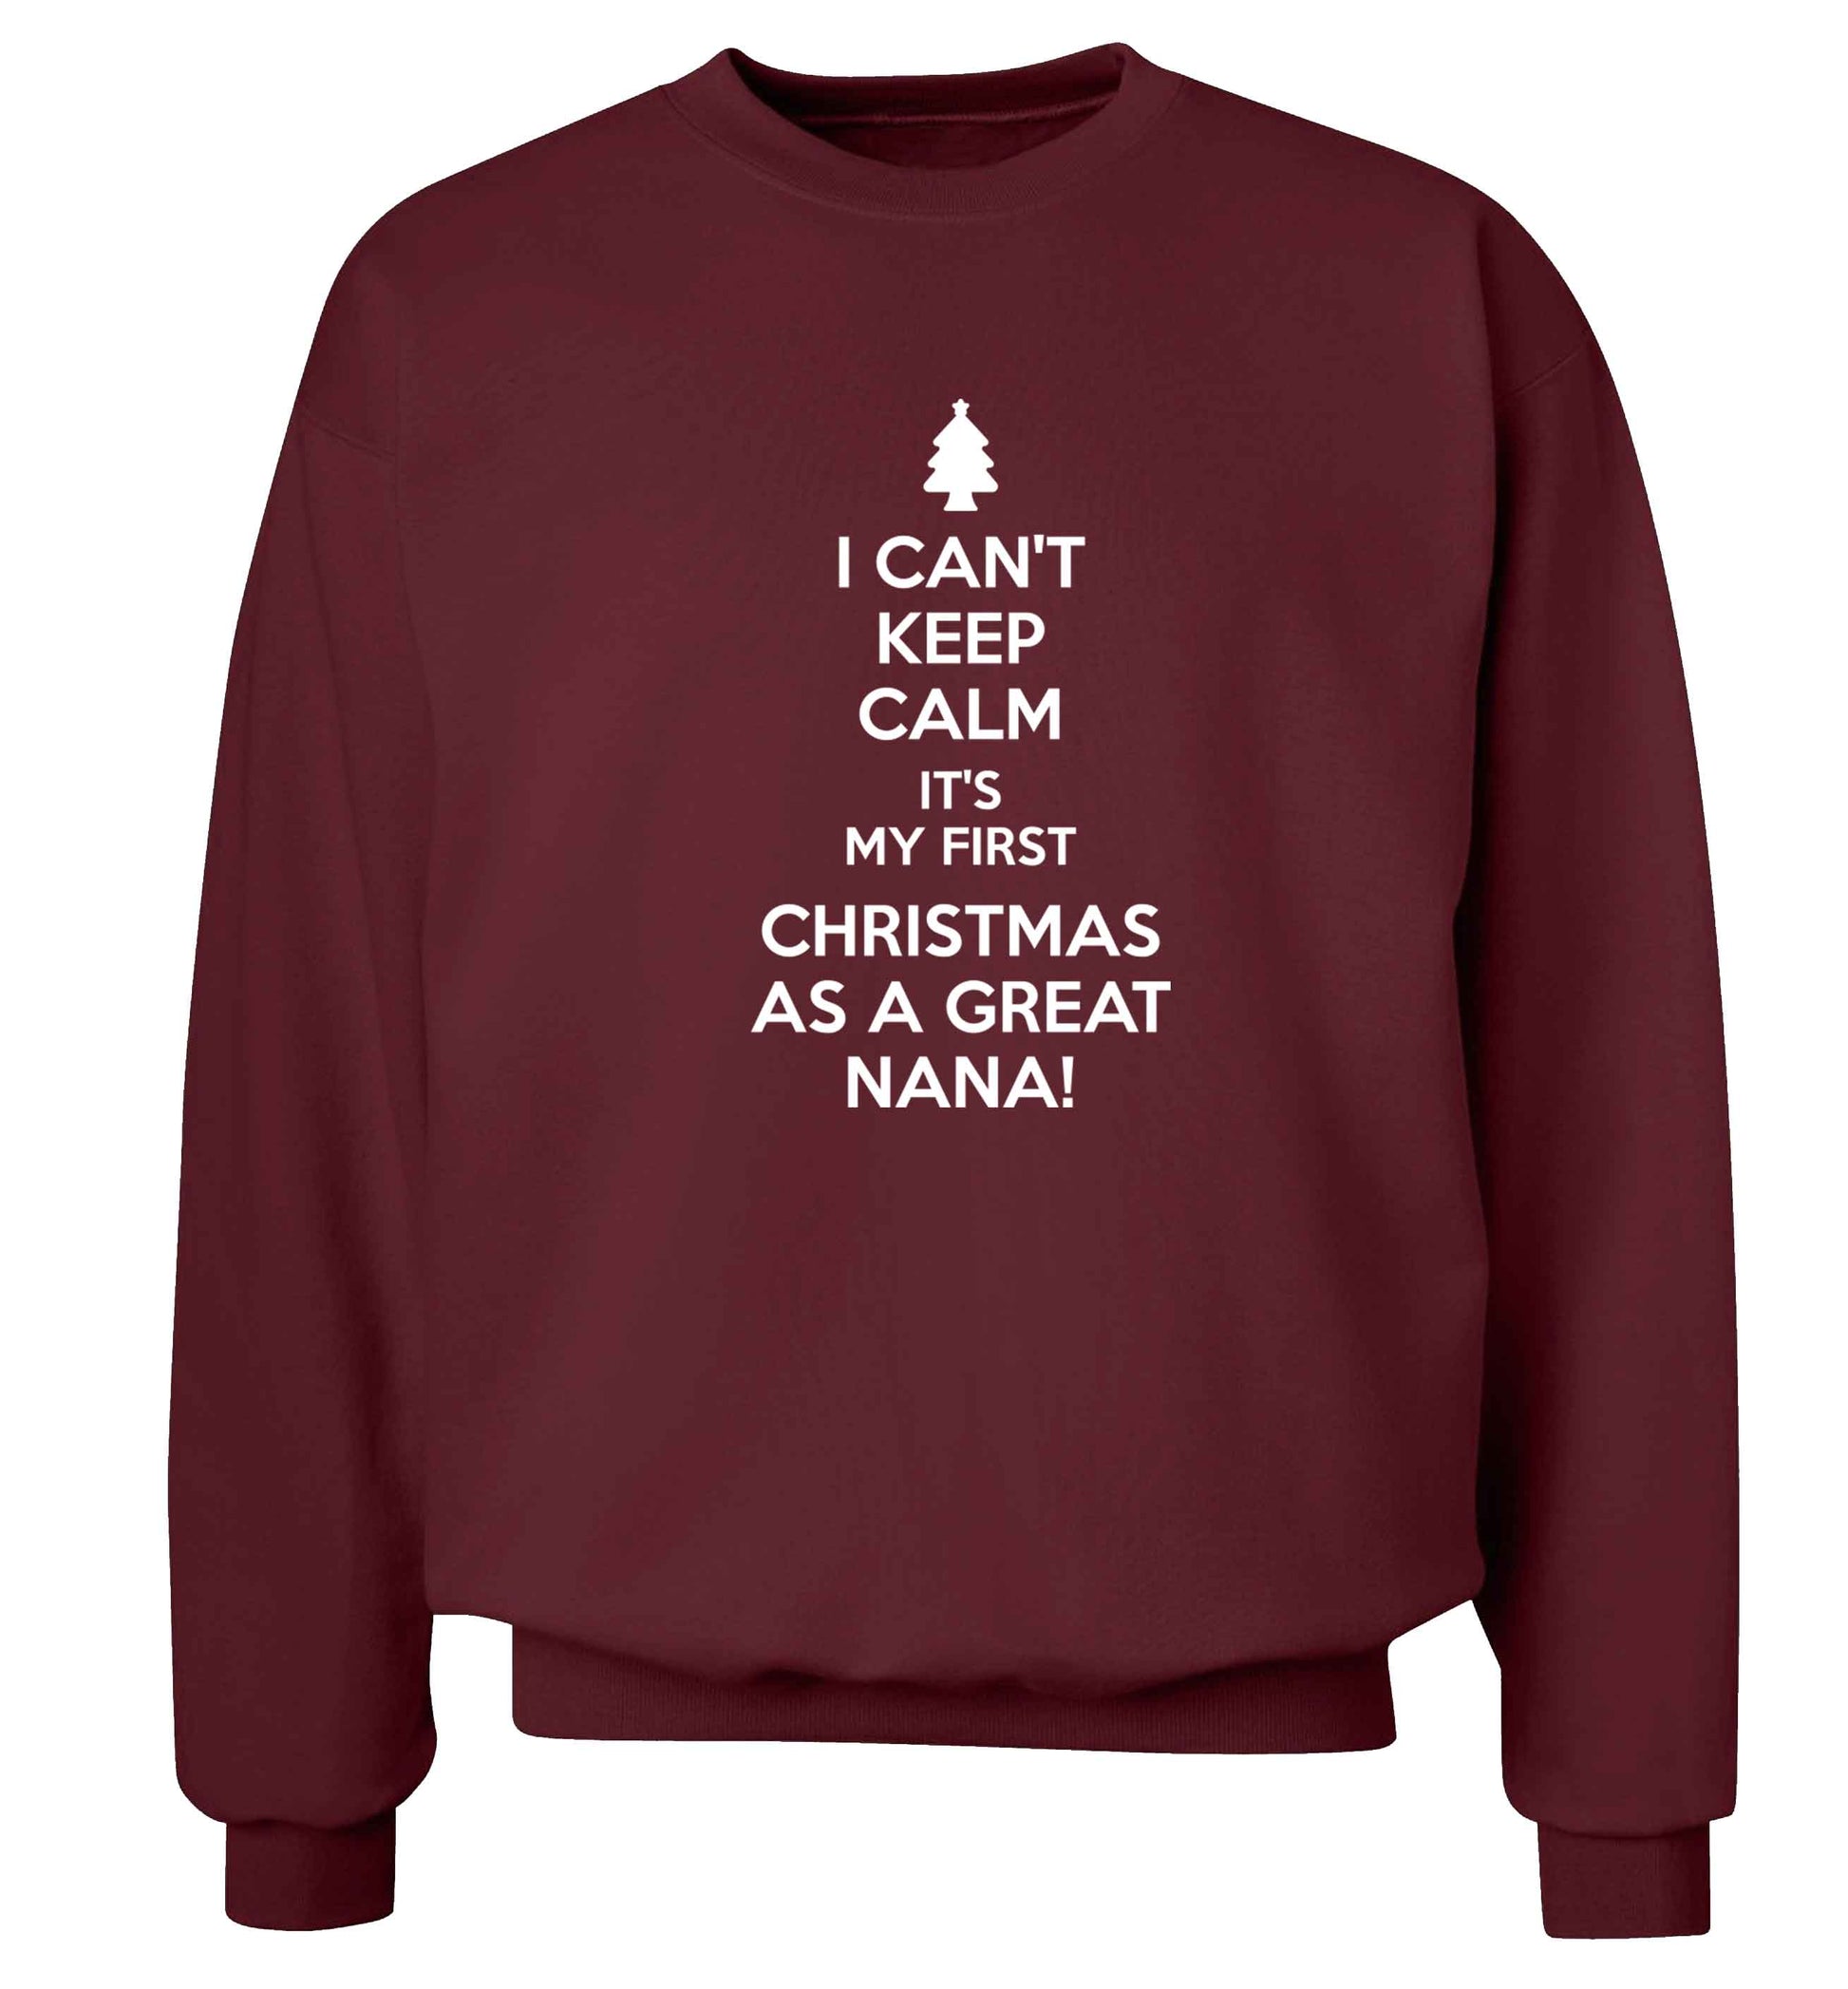 I can't keep calm it's my first Christmas as a great nana! Adult's unisex maroon Sweater 2XL